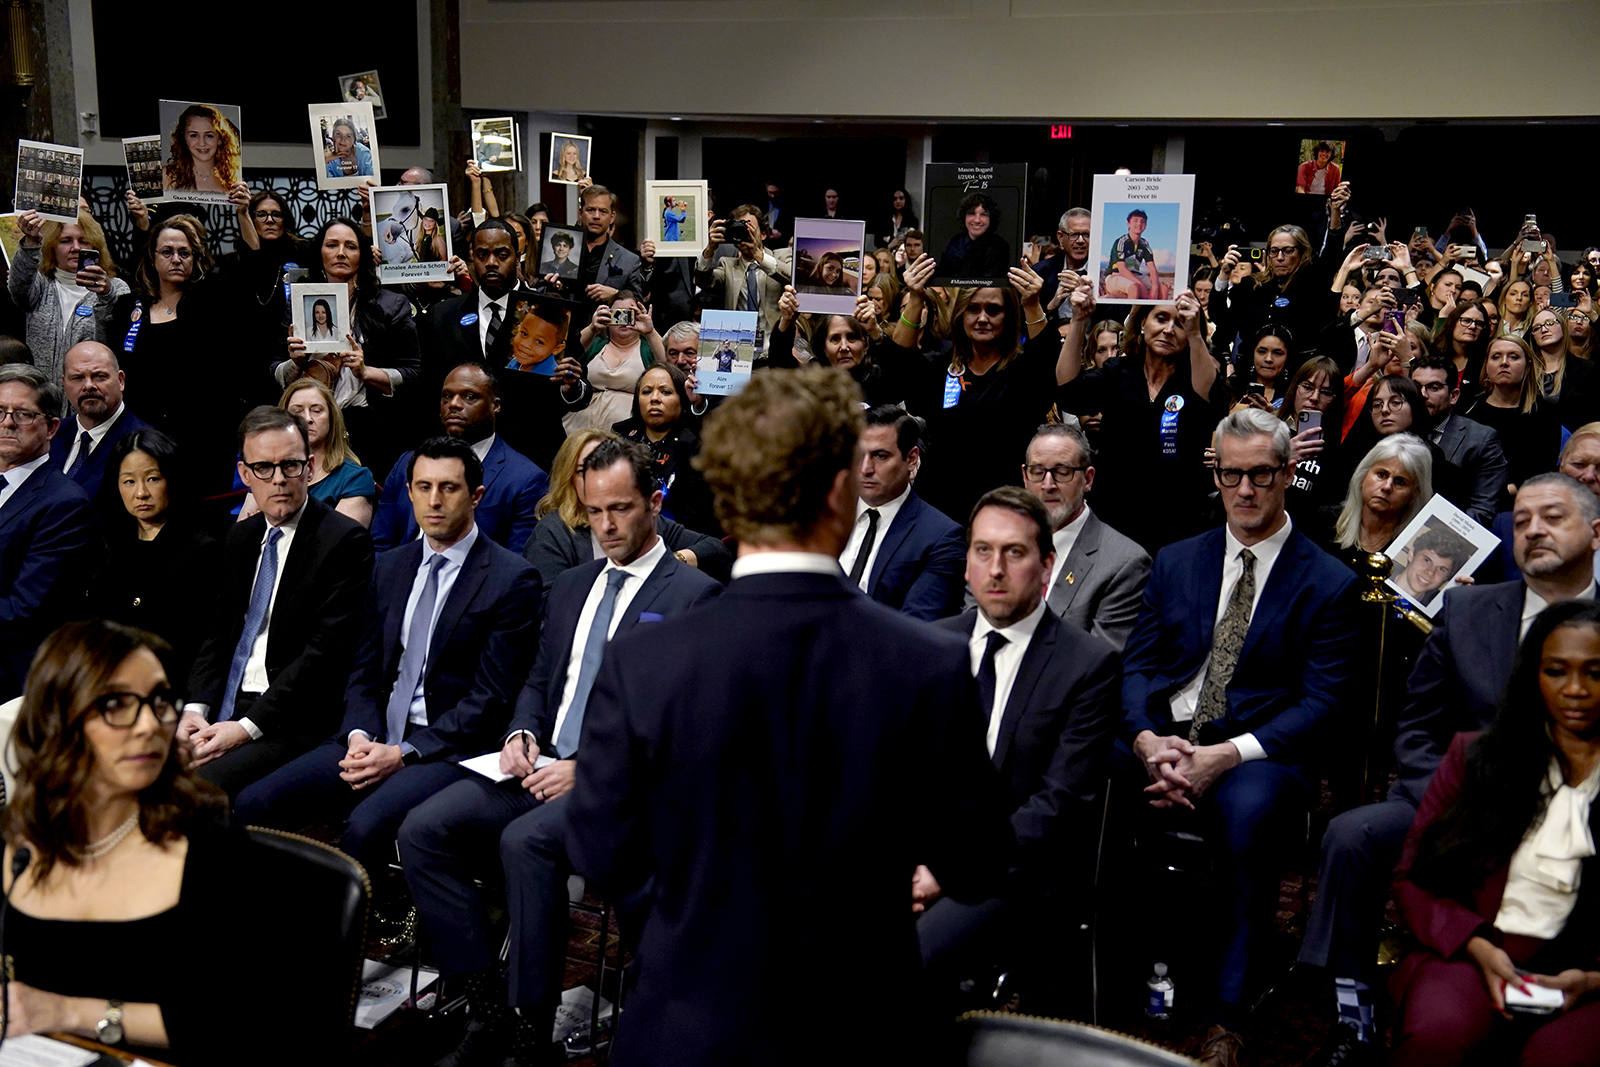 Mark Zuckerberg, center, addresses the audience during a Senate Judiciary Committee hearing in Washington, DC, today.